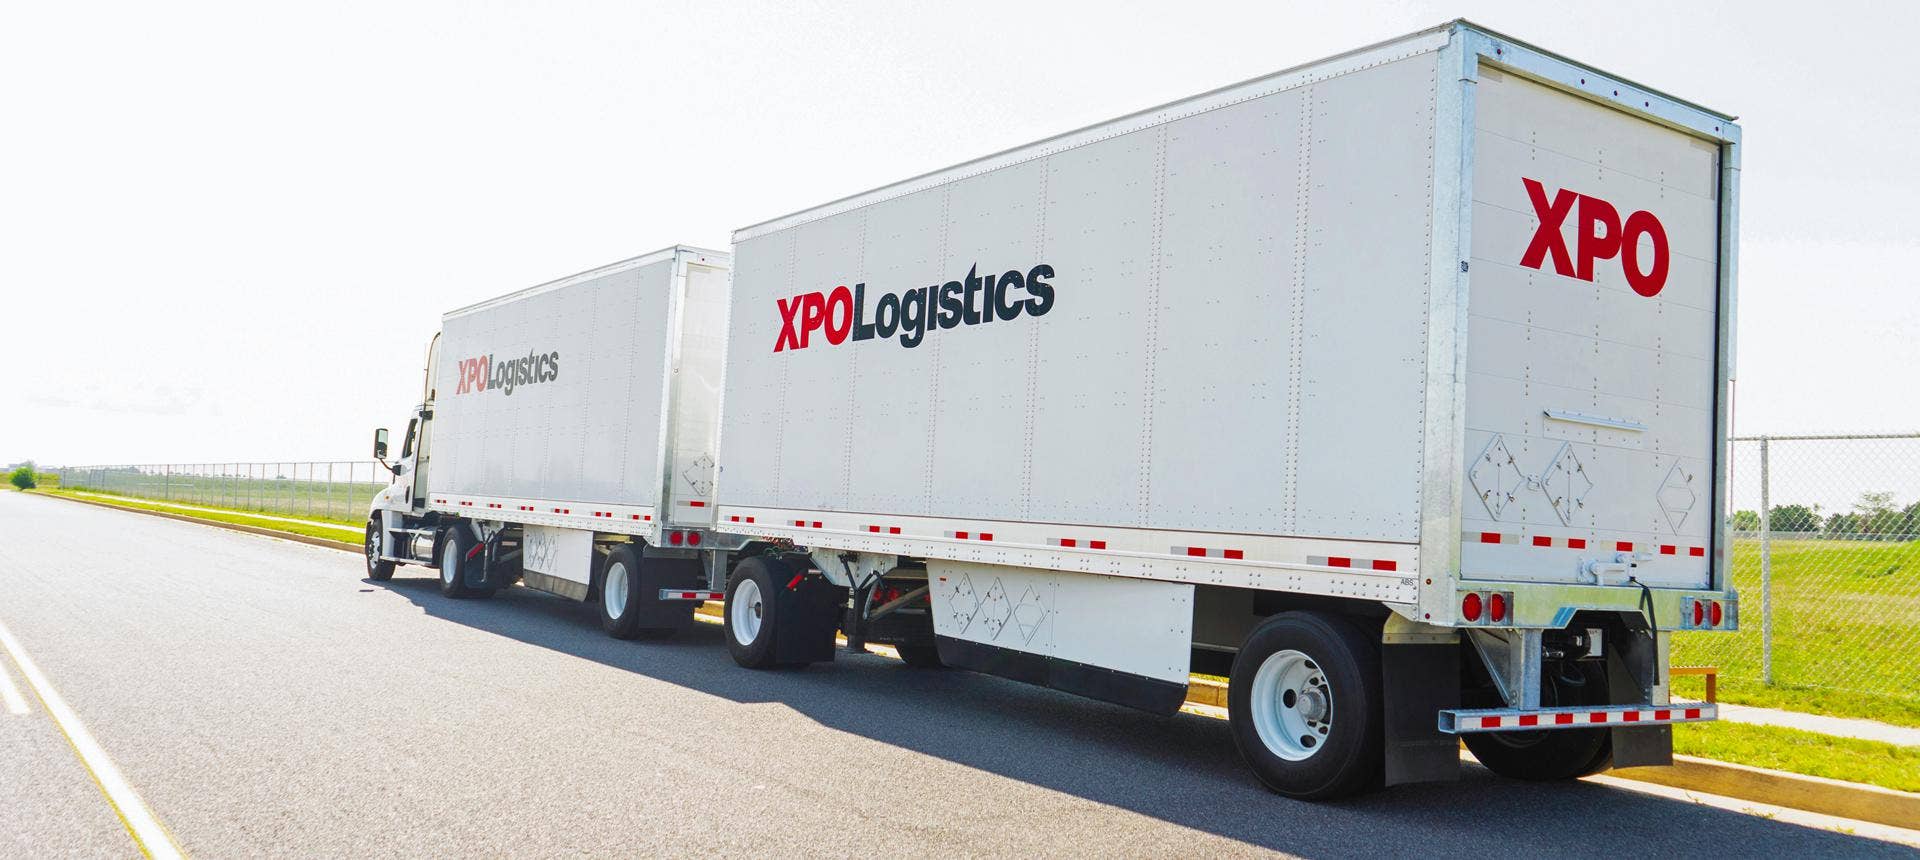 Goldman Sachs Analyst Upgrades Post-Spinoff XPO Logistics From Neutral To Buy